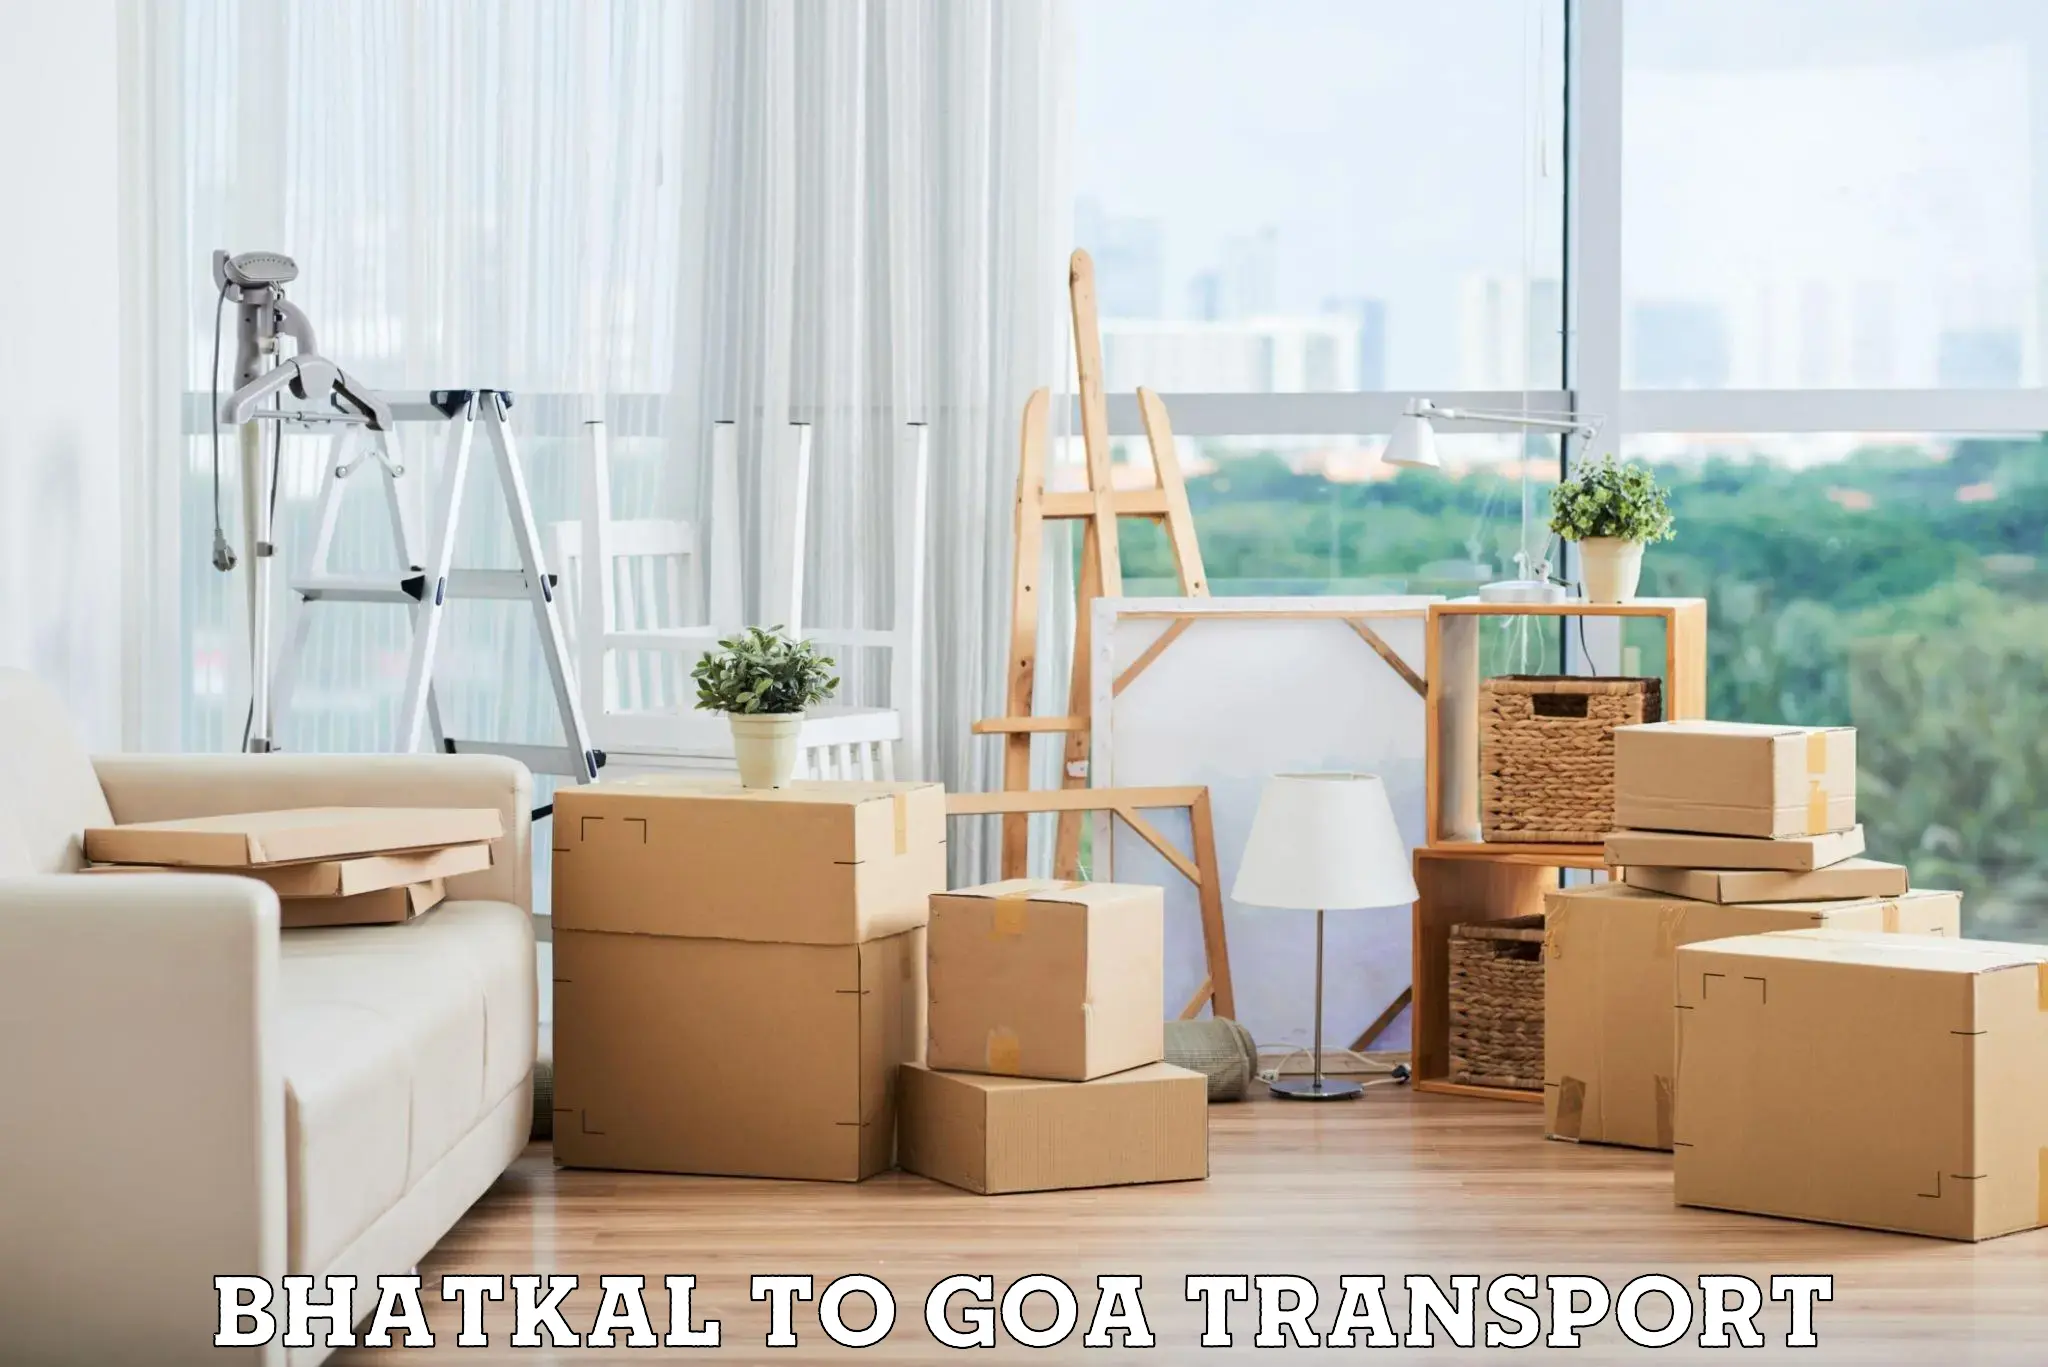 Delivery service Bhatkal to Goa